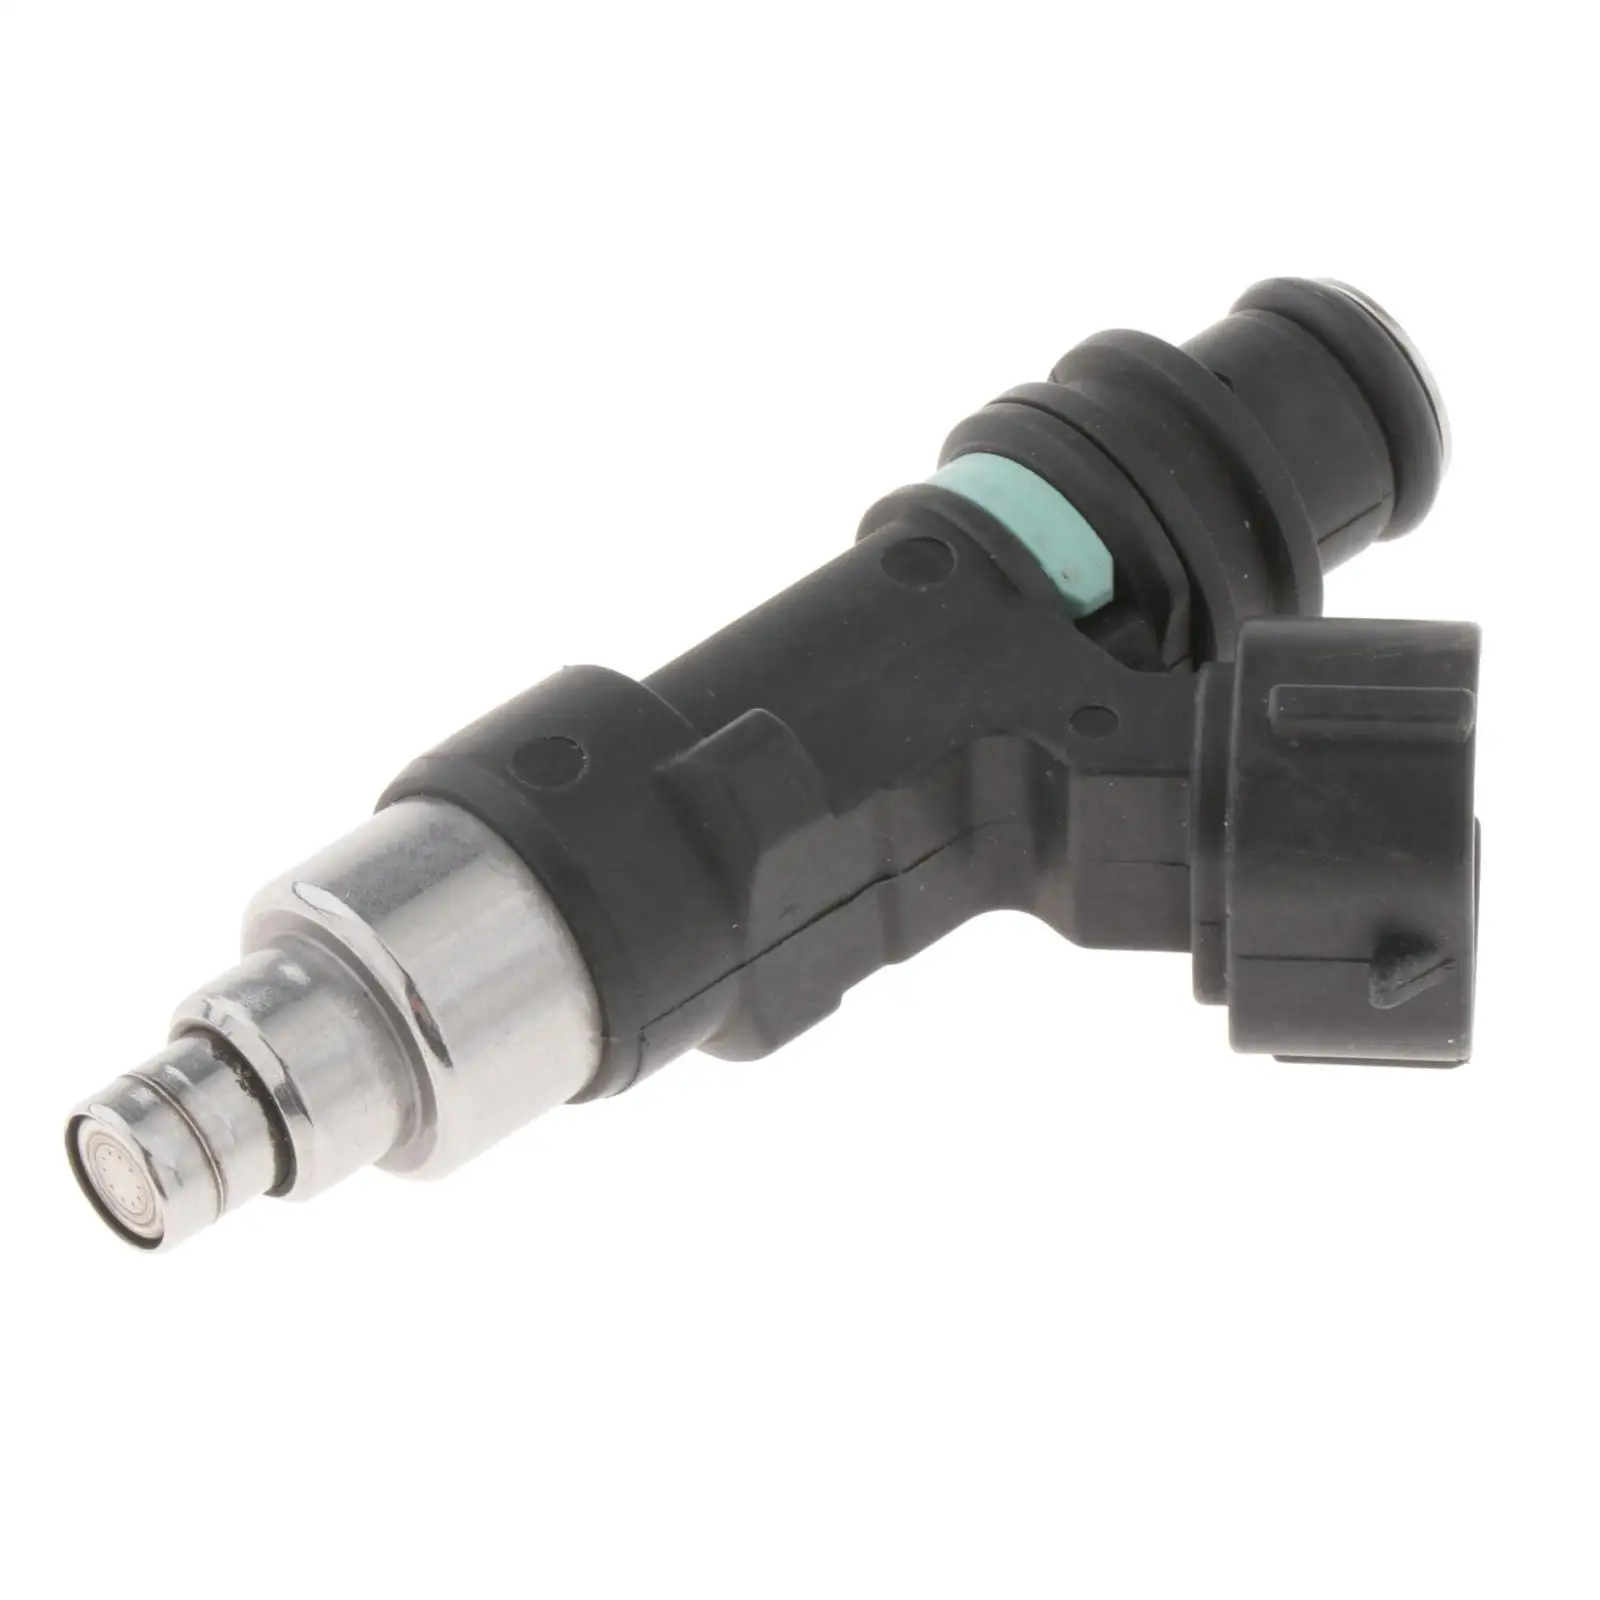 Fuel Injector Replacement 15710-82K50 for Suzuki Outboard DF 90 2015 Boat Parts High Performance Durable Premium